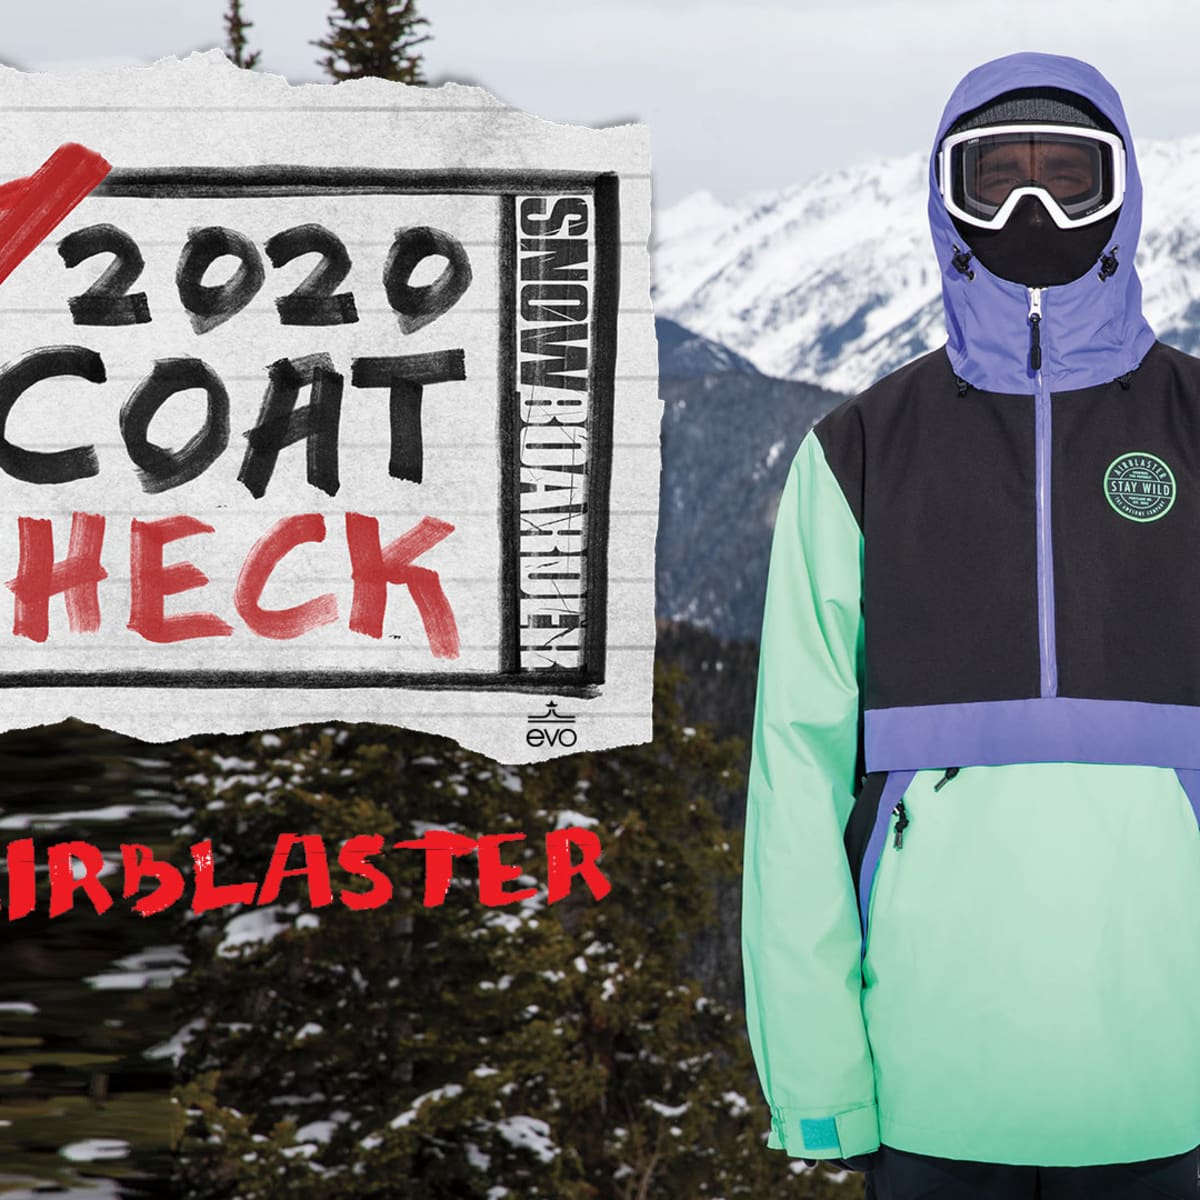 2020 Coat Check: Airblaster's Trenchover Jacket - Snowboarder